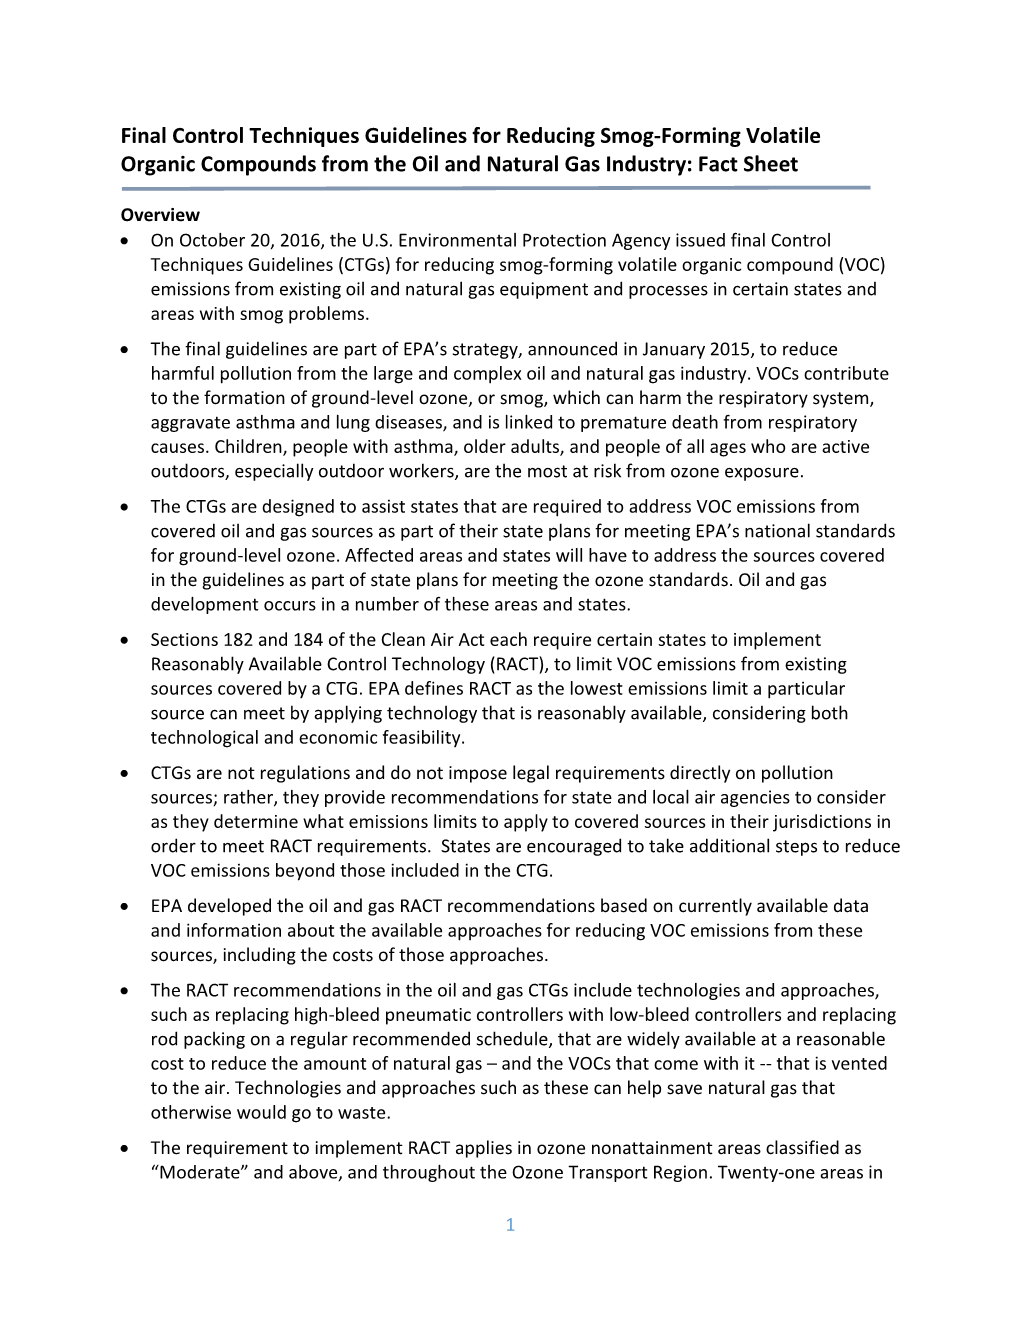 Final Control Techniques Guidelines for Reducing Smog-Forming Volatile Organic Compounds from the Oil and Natural Gas Industry: Fact Sheet